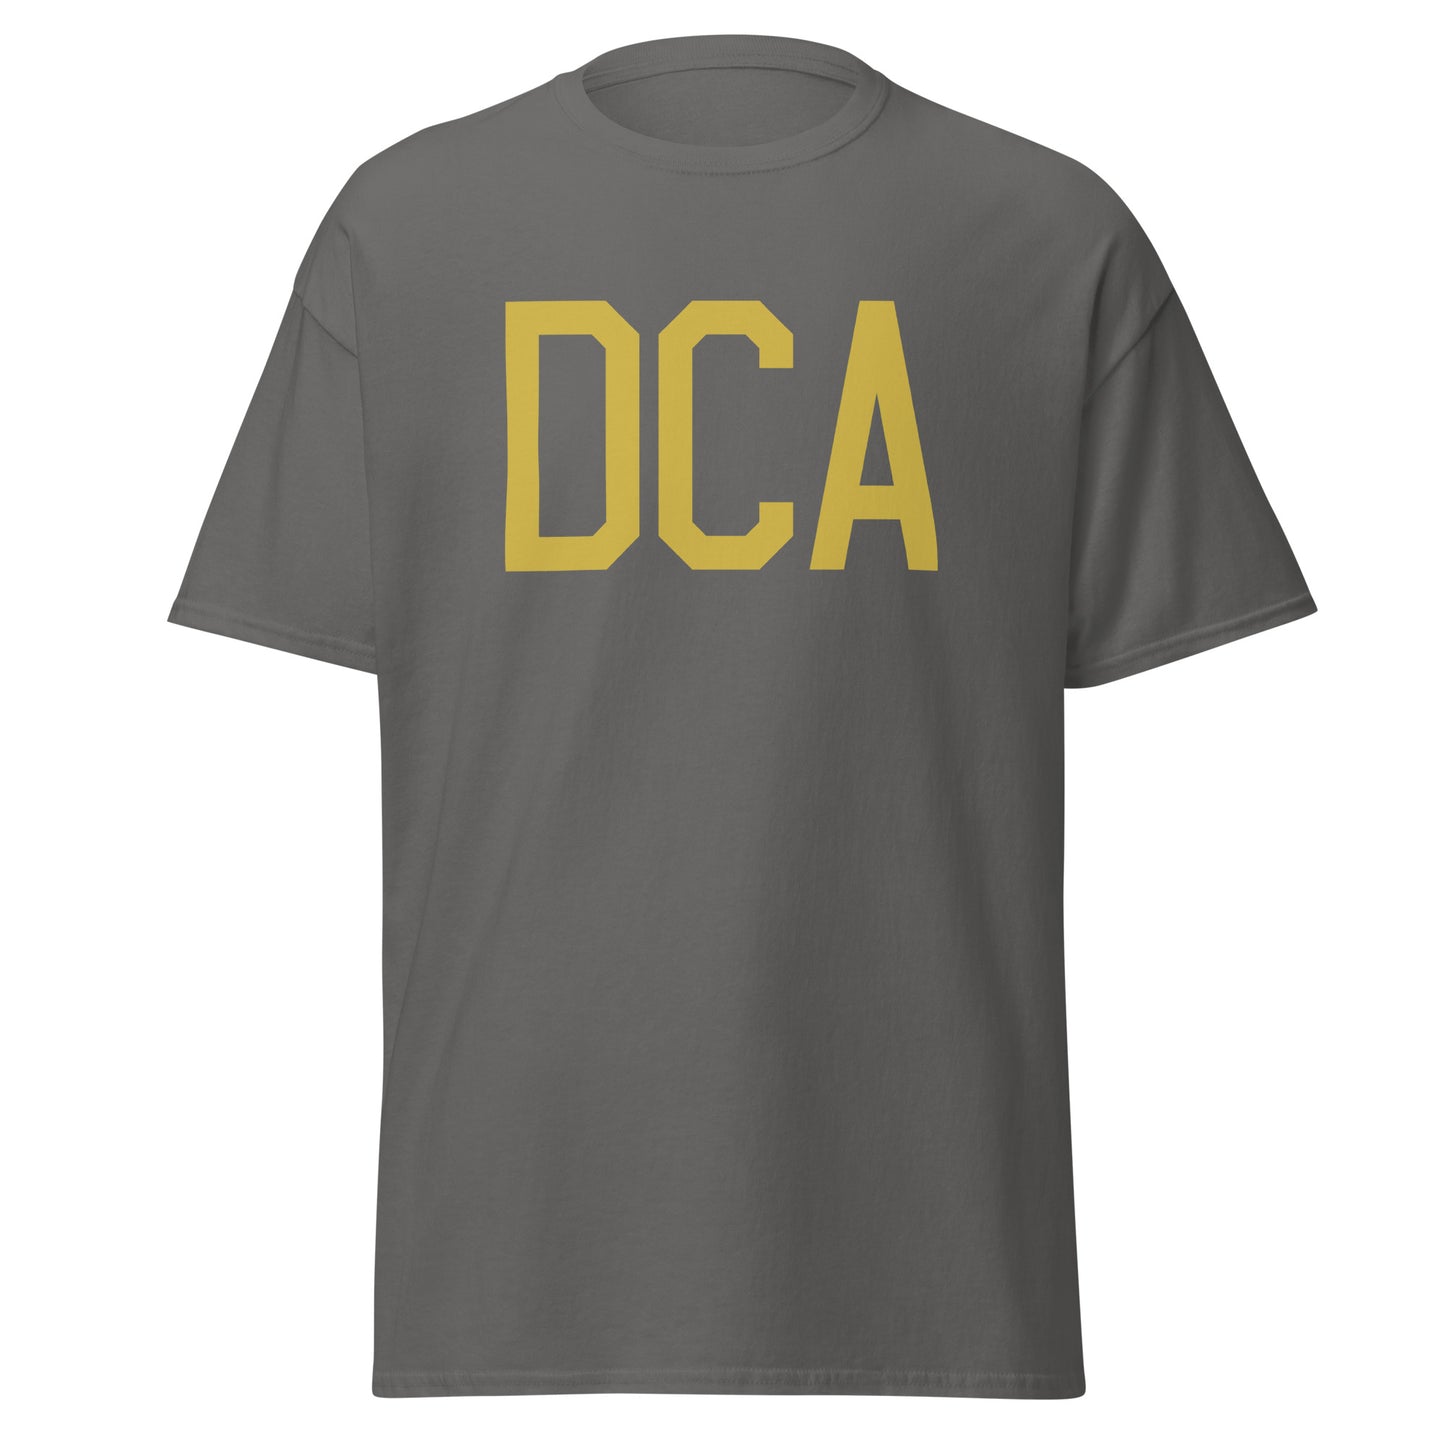 Aviation Enthusiast Men's Tee - Old Gold Graphic • DCA Washington • YHM Designs - Image 05